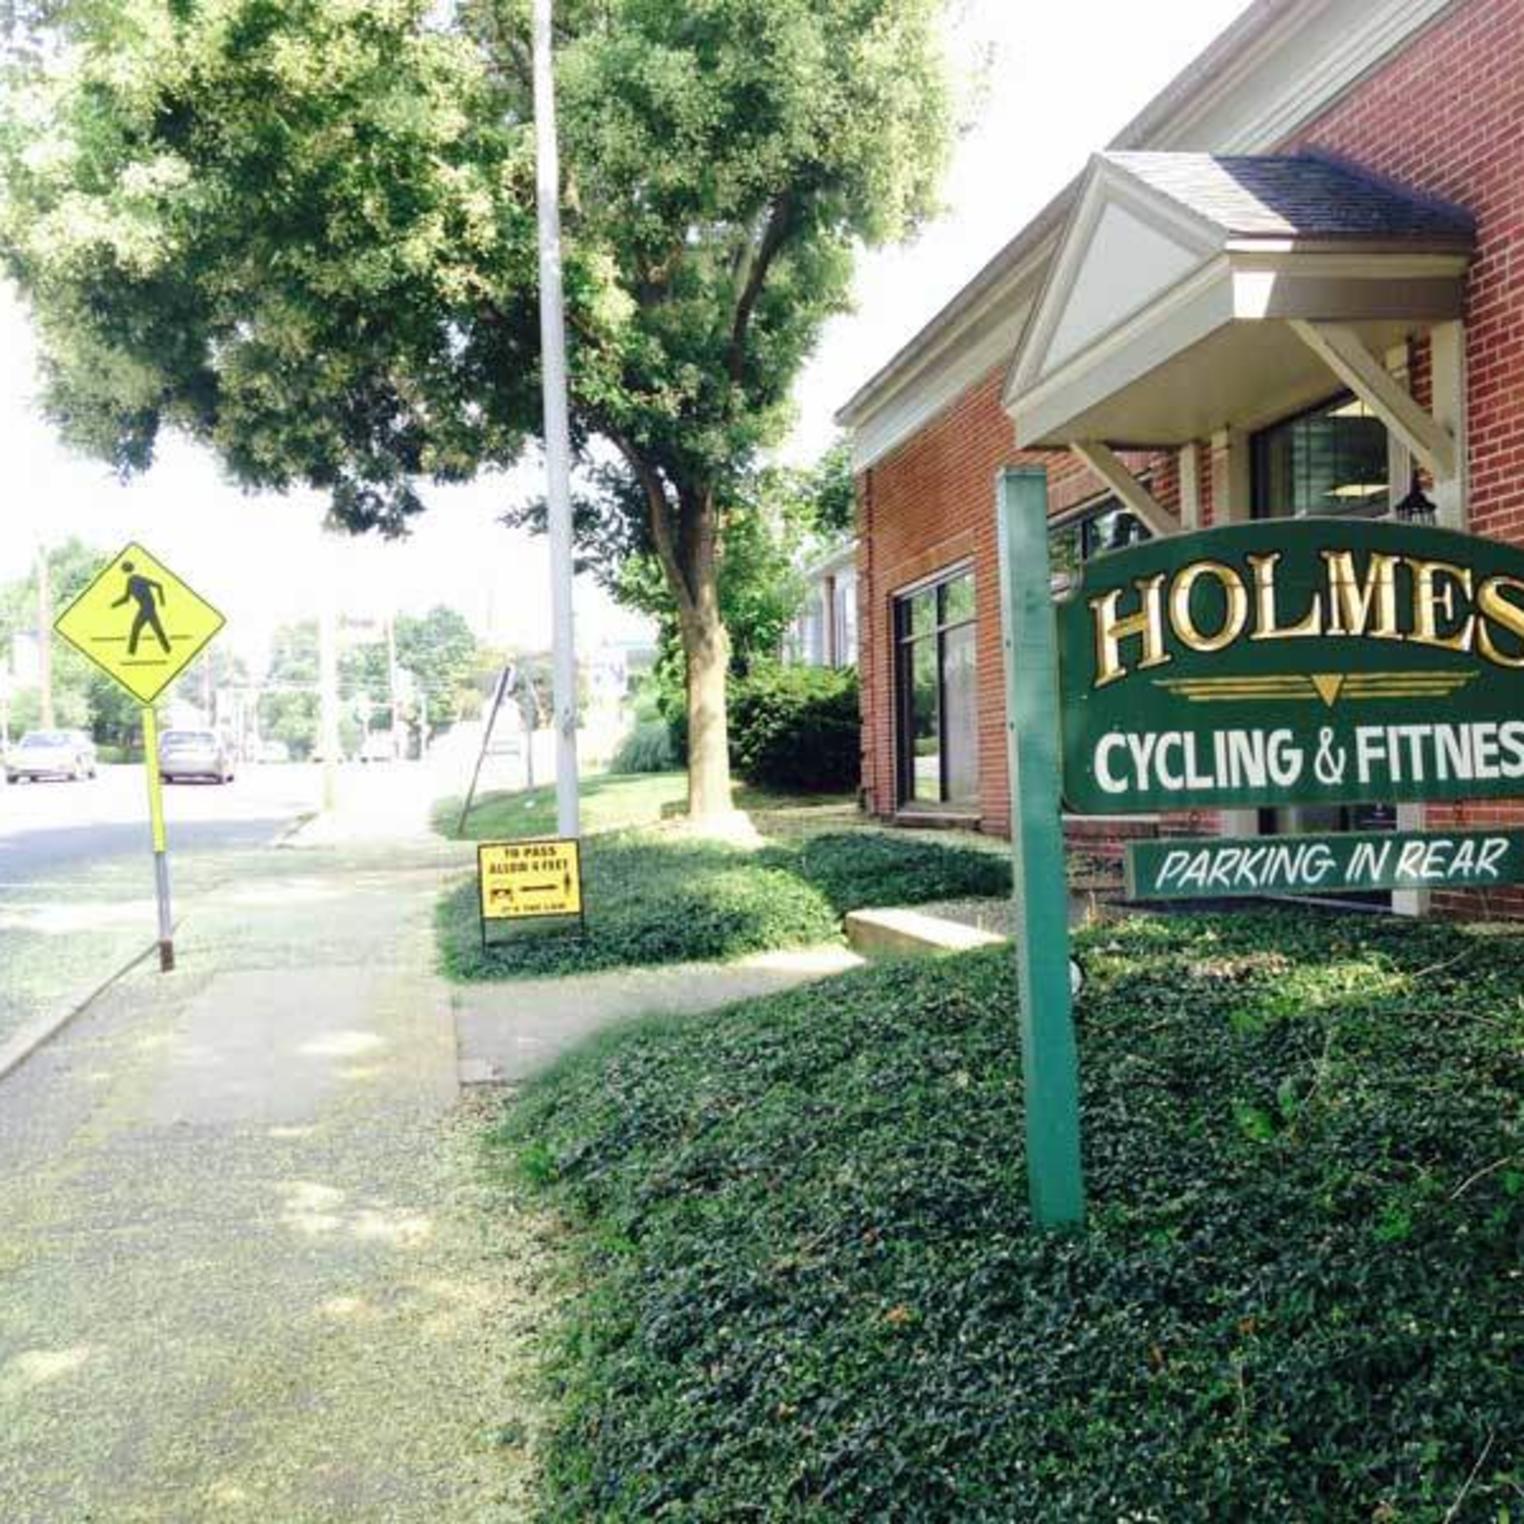 Holmes Cycling & Fitness